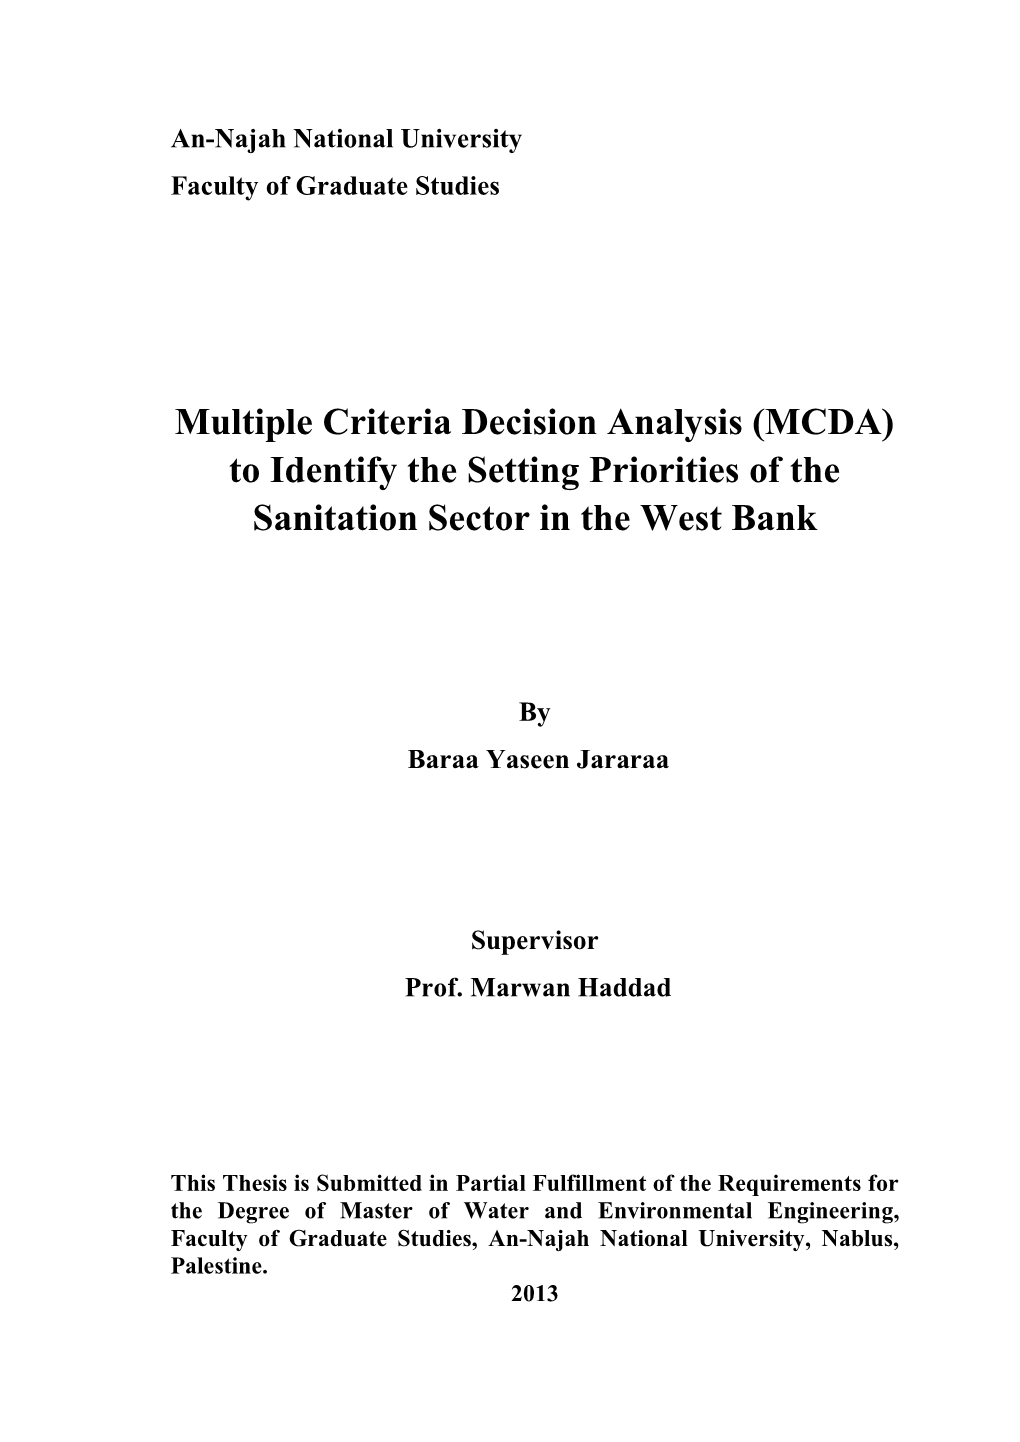 Multiple Criteria Decision Analysis (MCDA) to Identify the Setting Priorities of the Sanitation Sector in the West Bank